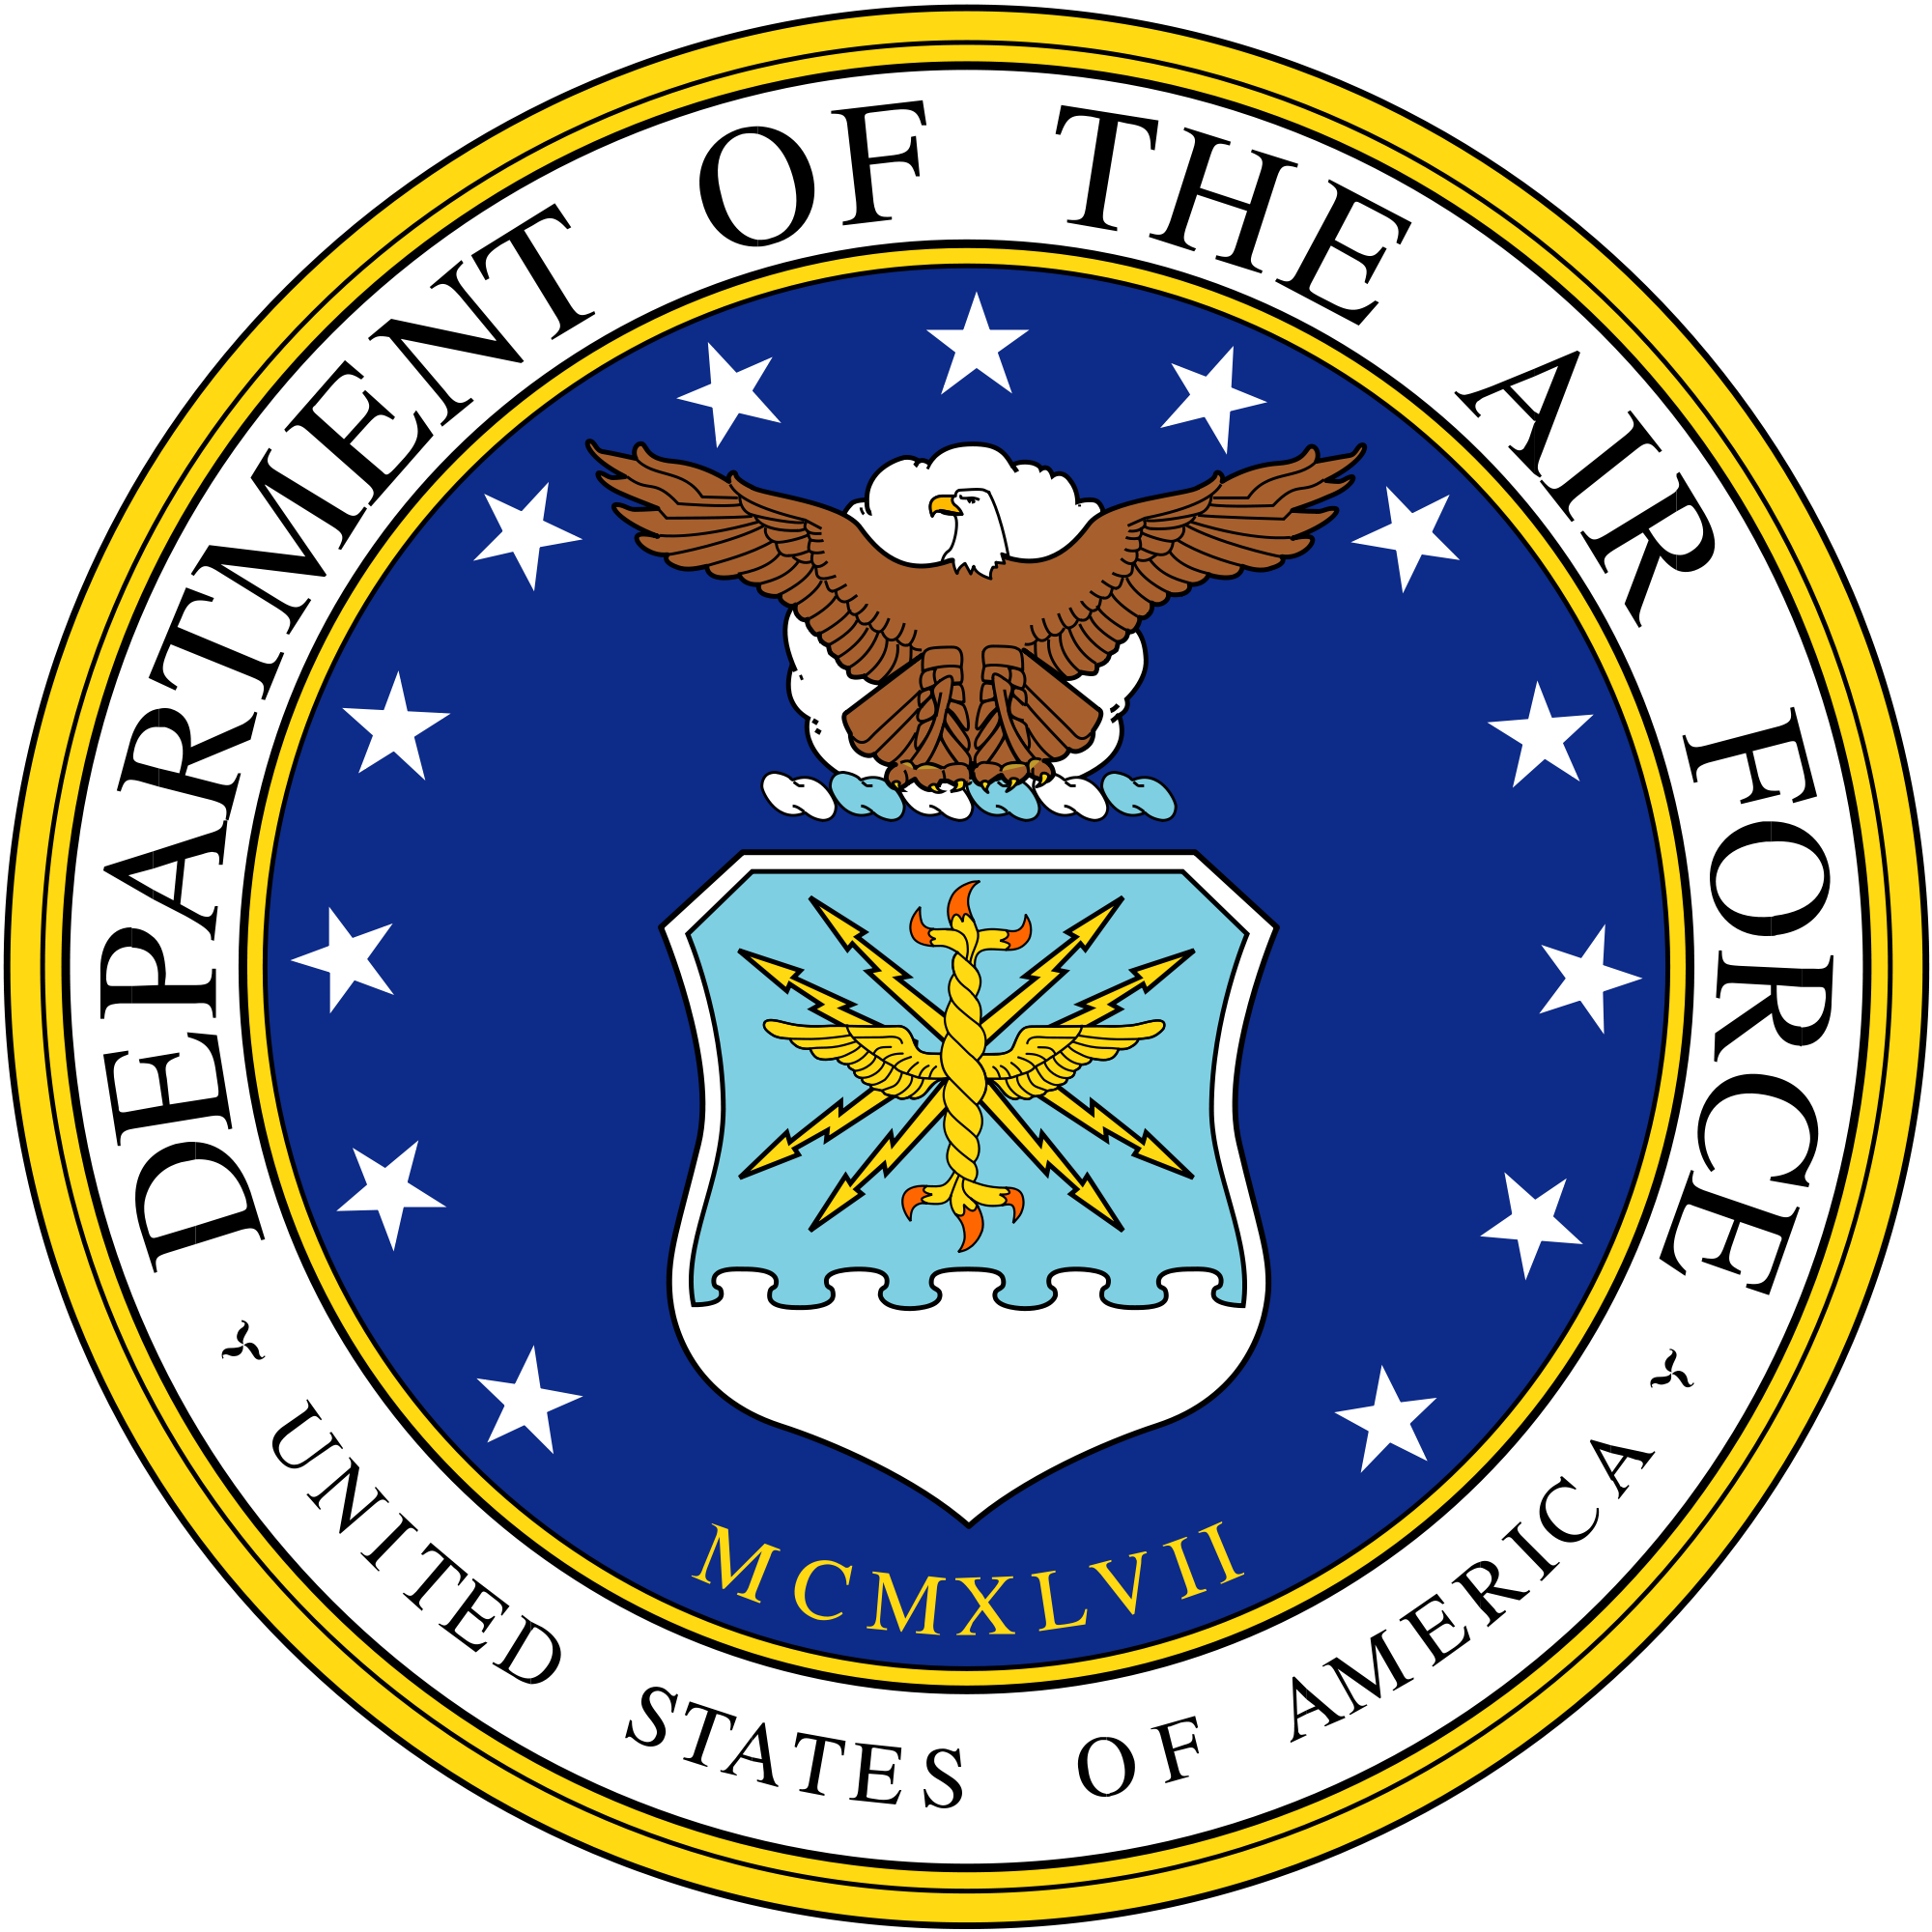 United States Air Force - Wikipedia, the free encyclopedia